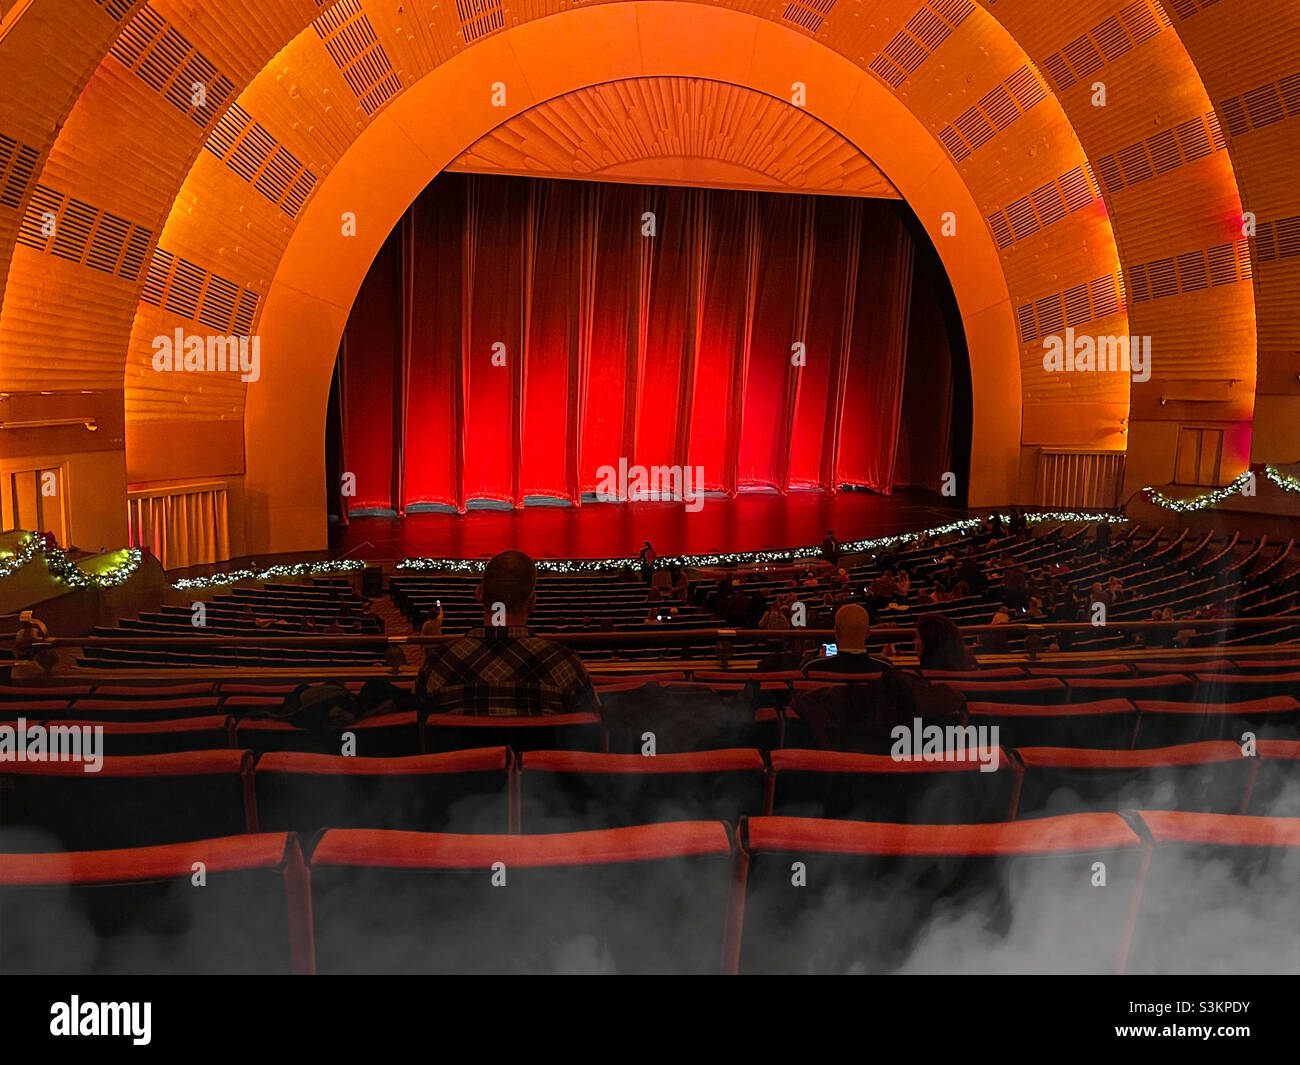 The interior theater at radio city music Hall features a huge red curtain,  2021, New York City, United States Stock Photo - Alamy